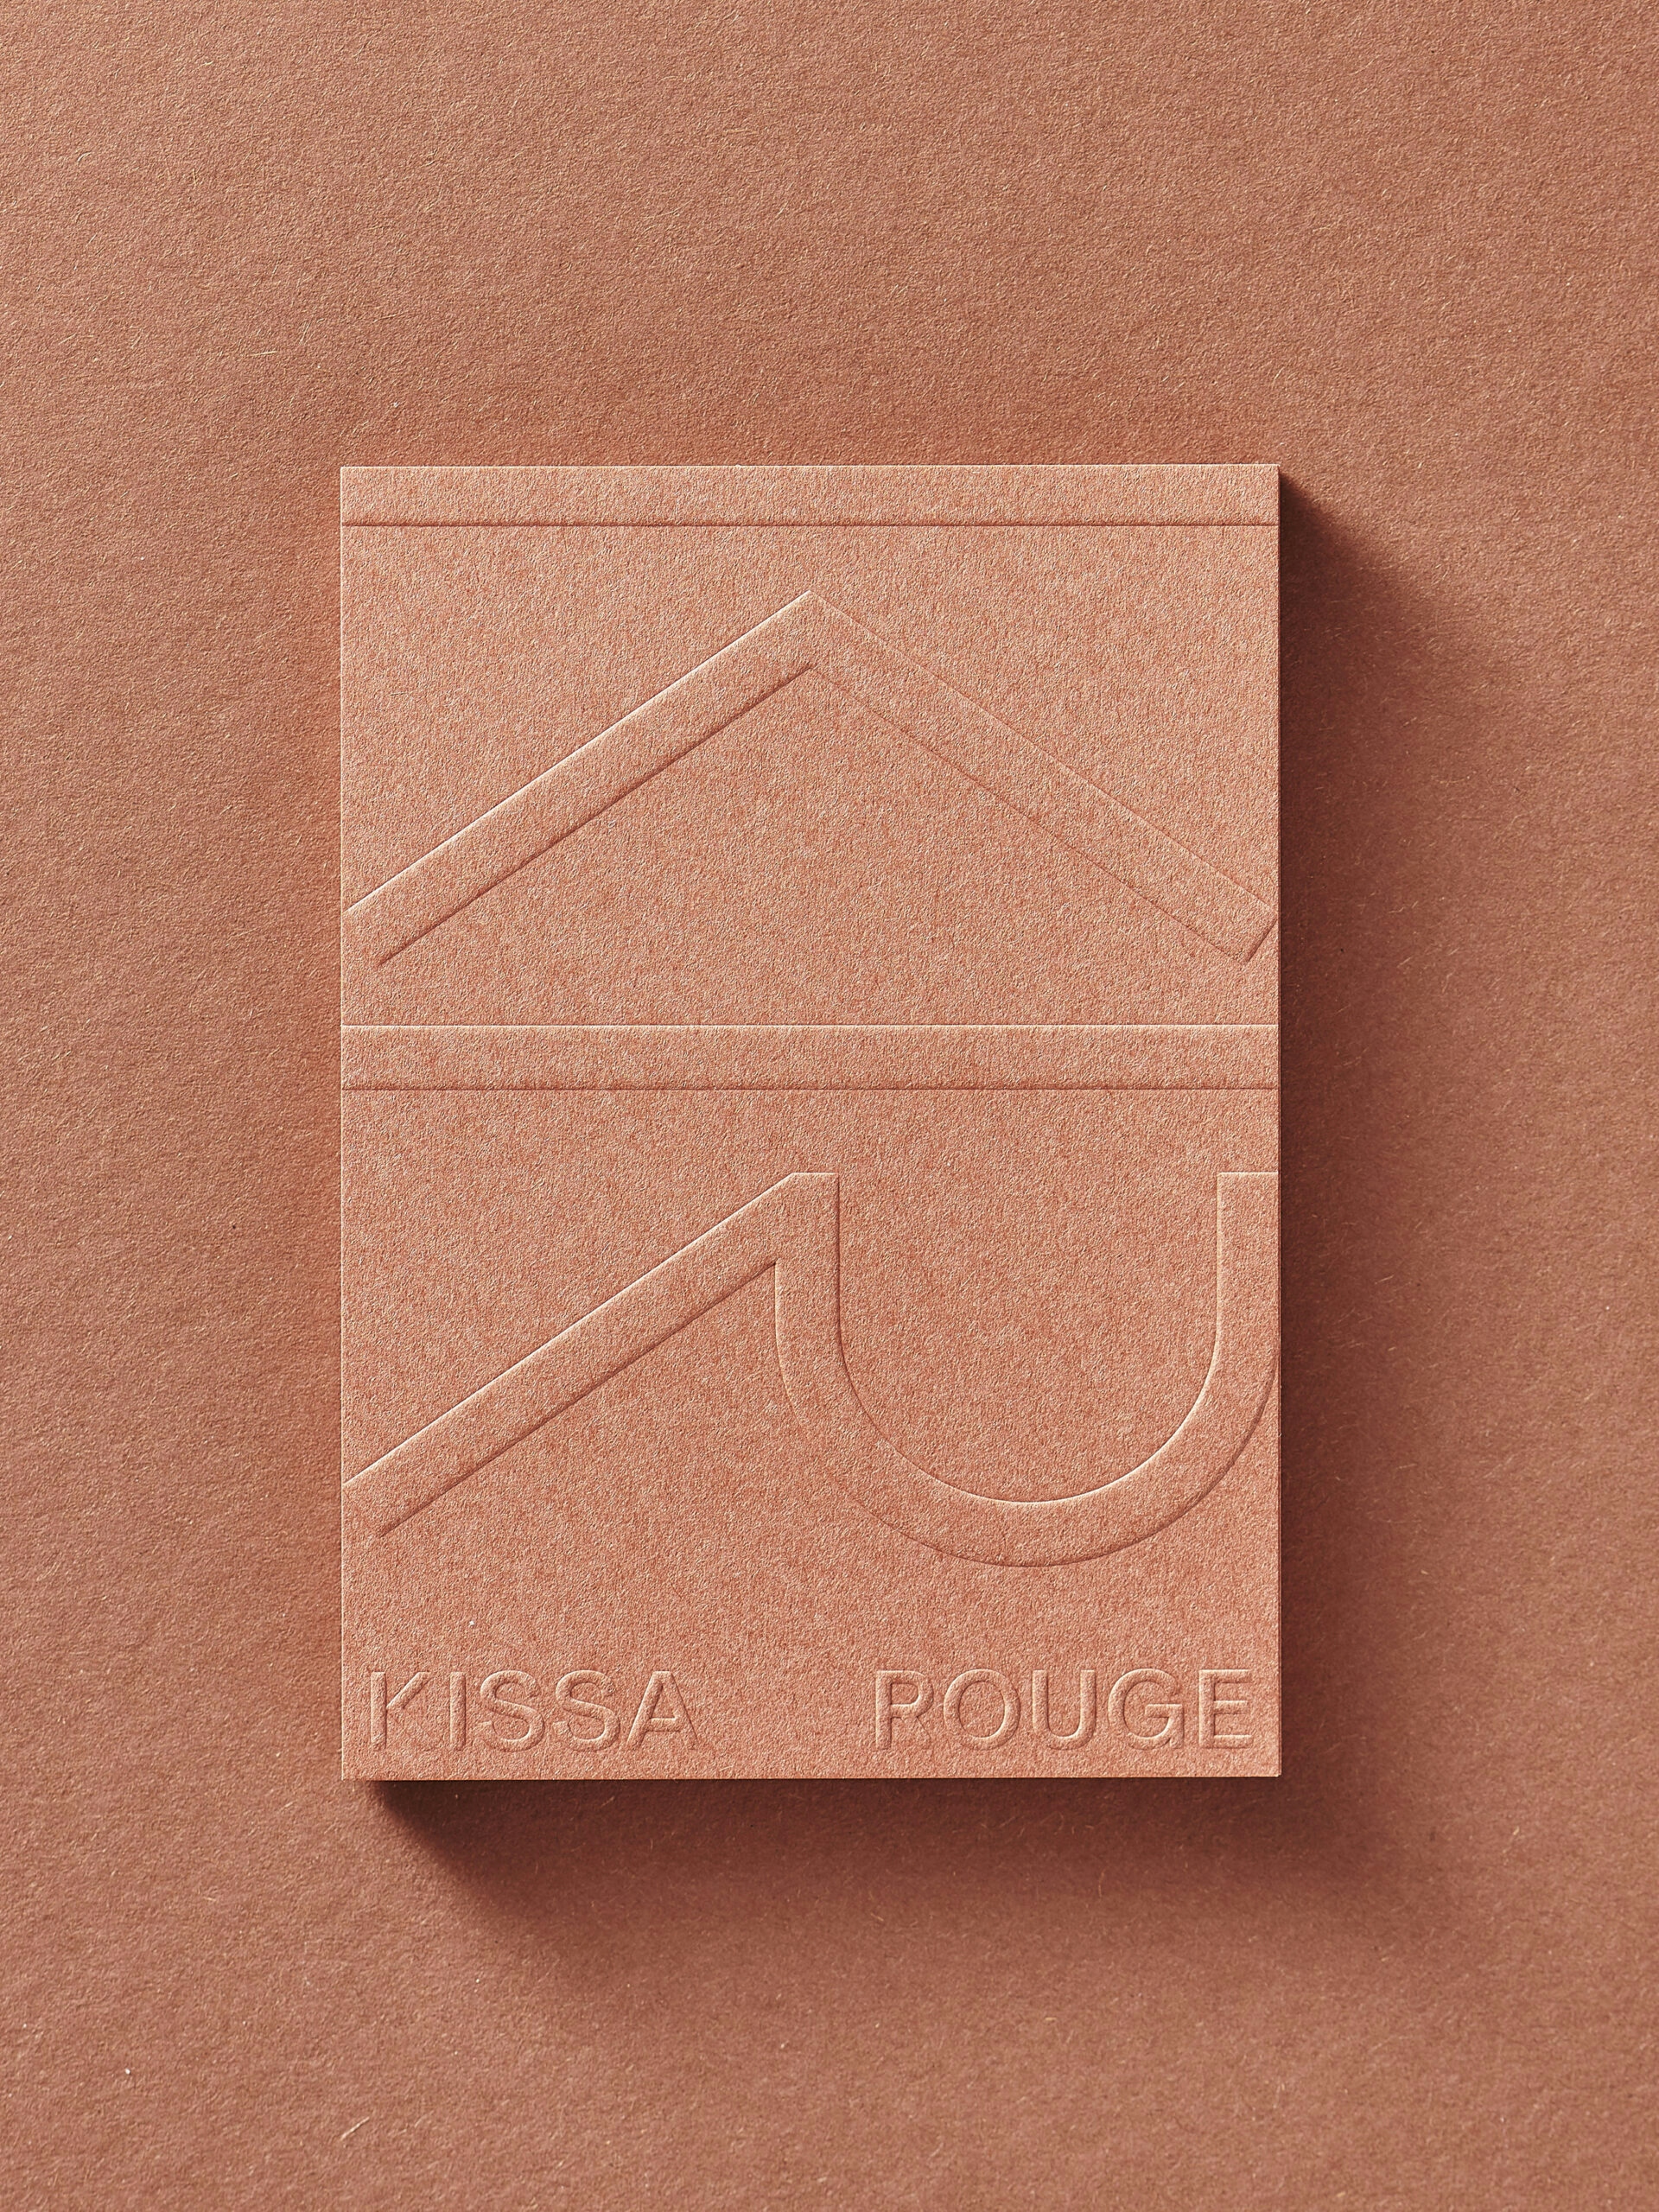 Kissa Rouge shop card front in earthy redish paper with a blind embossing